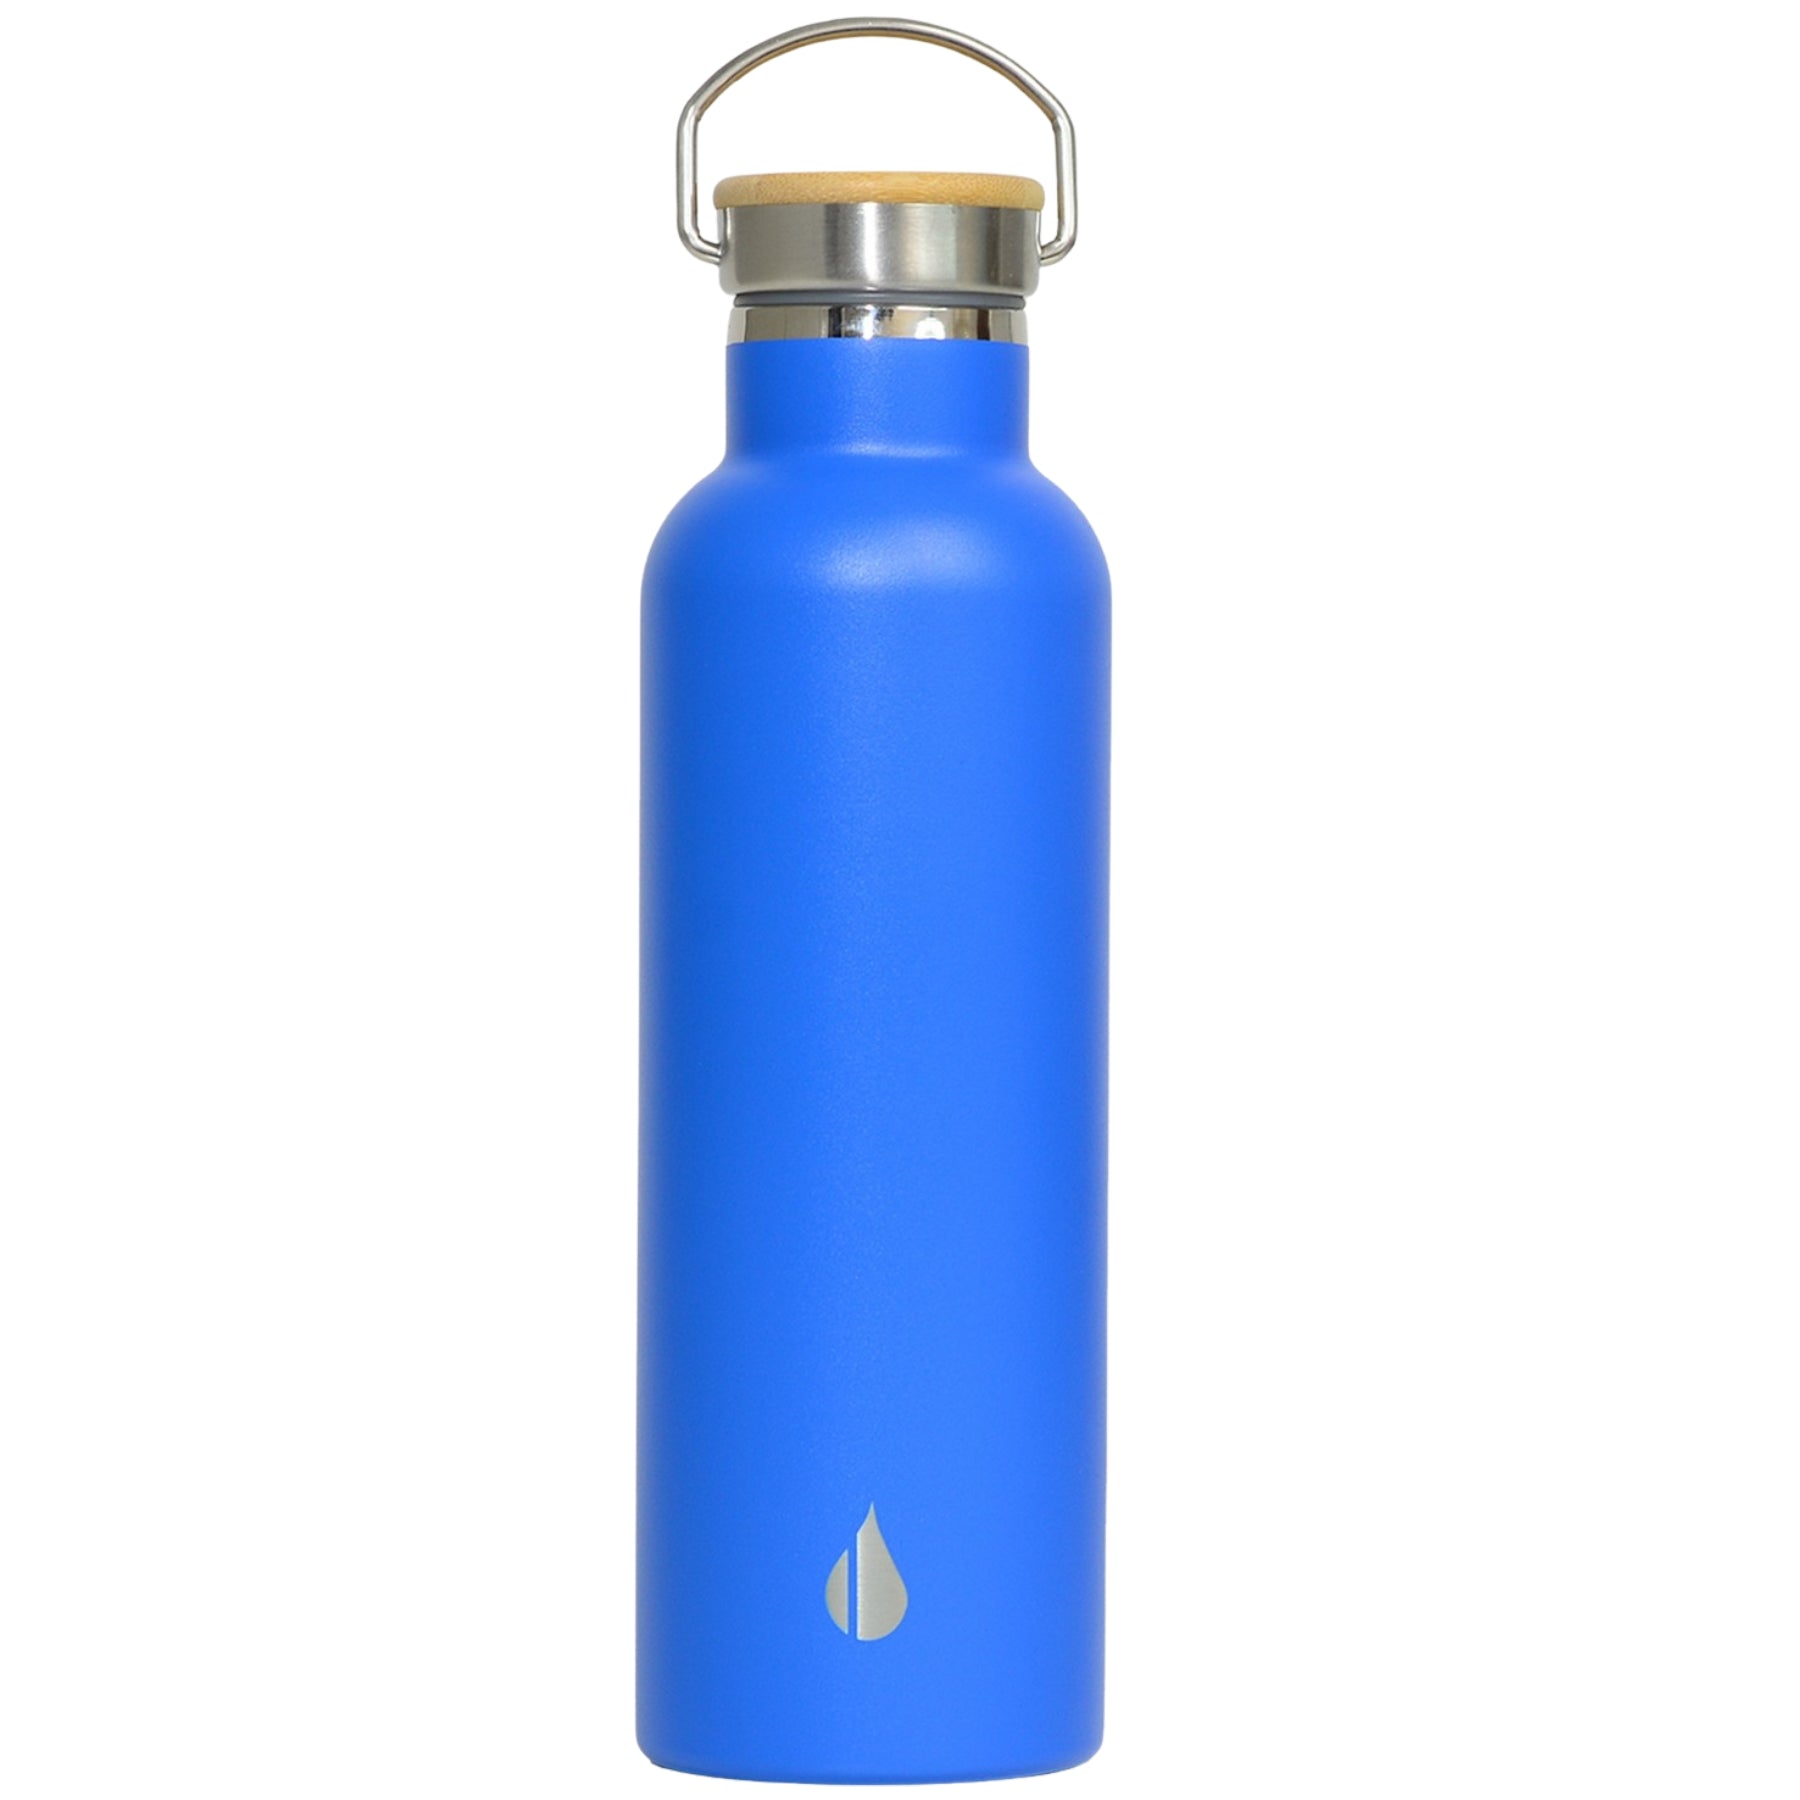 Customizable Elemental® 25 oz Stainless Steel Insulated Bottle in azure blue